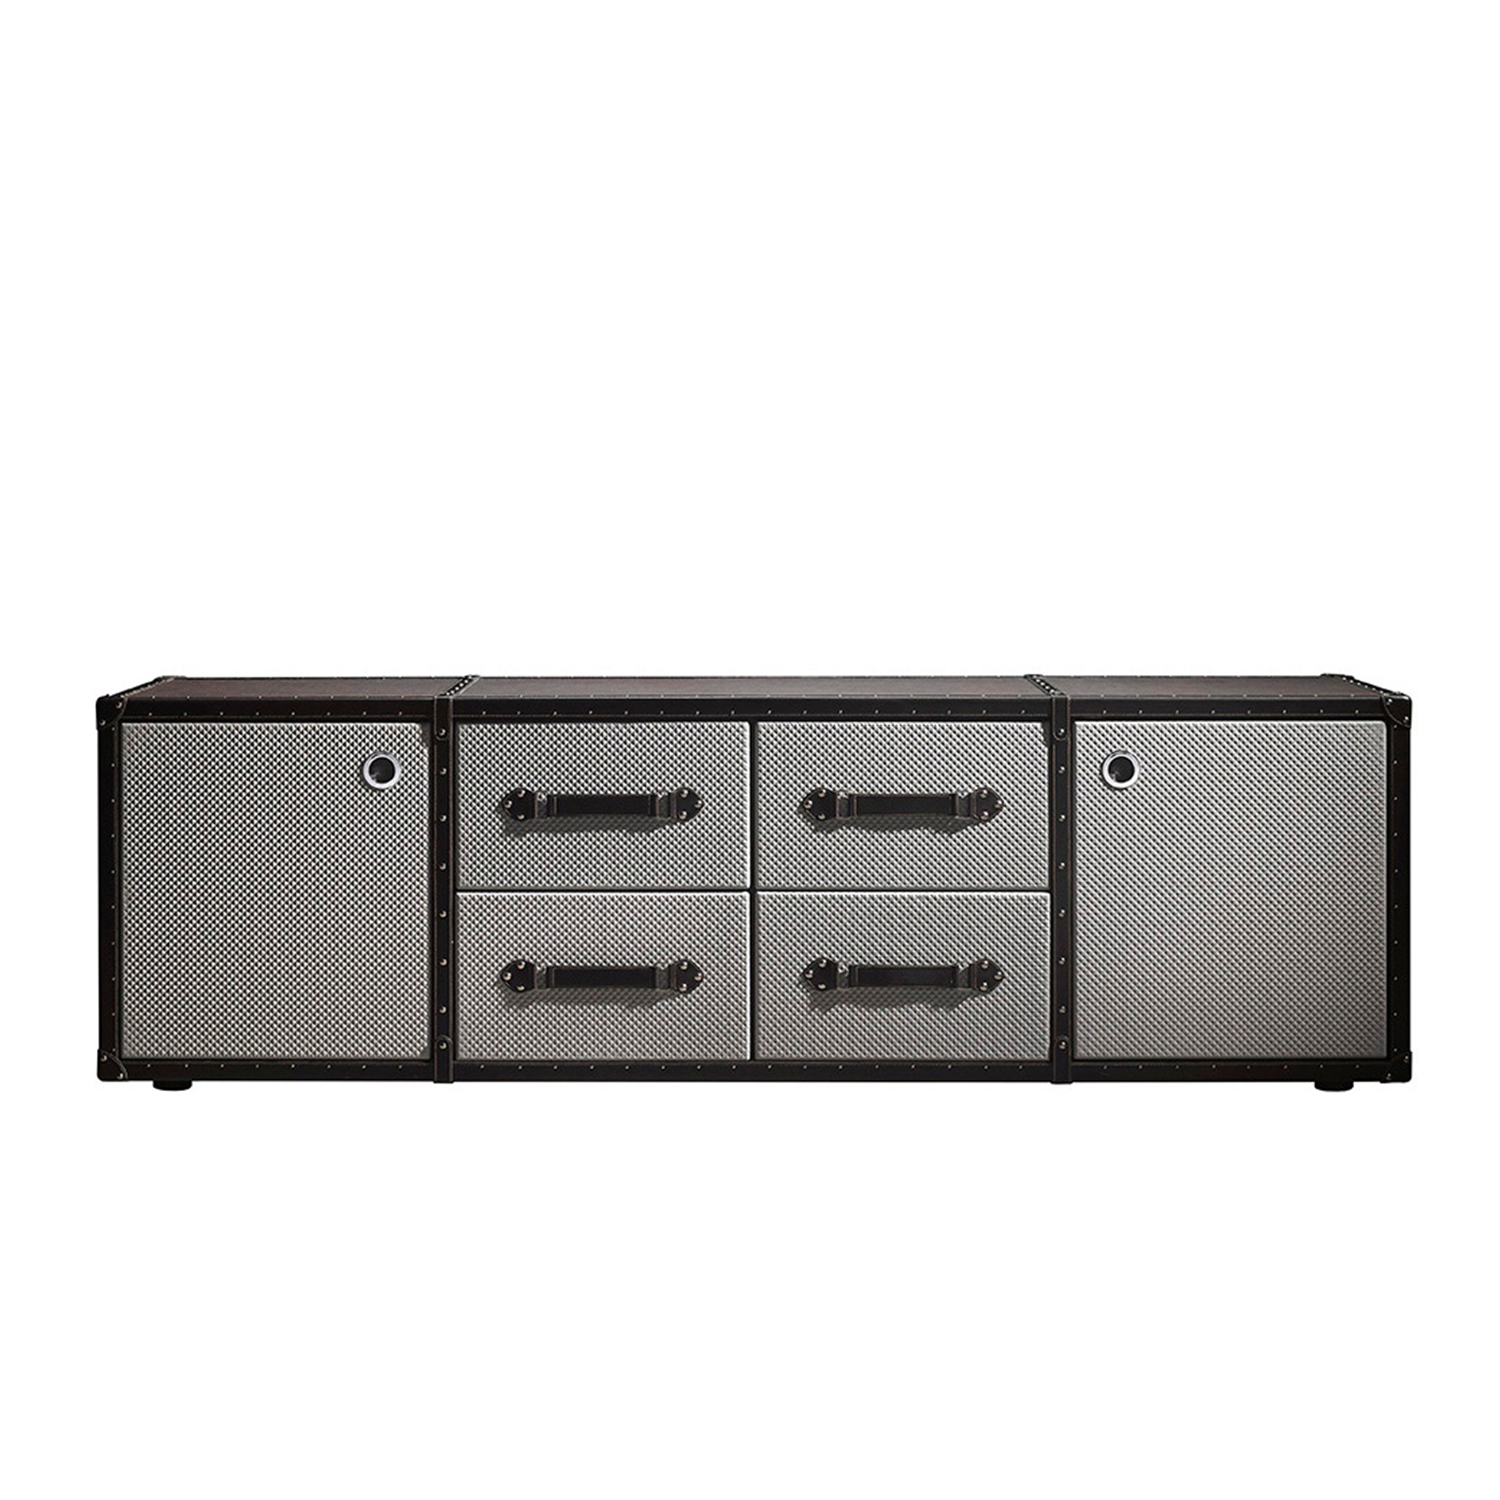 Traveler Sideboard | Coleccion Alexandra | Sideboards and buffets | traveler-sideboard